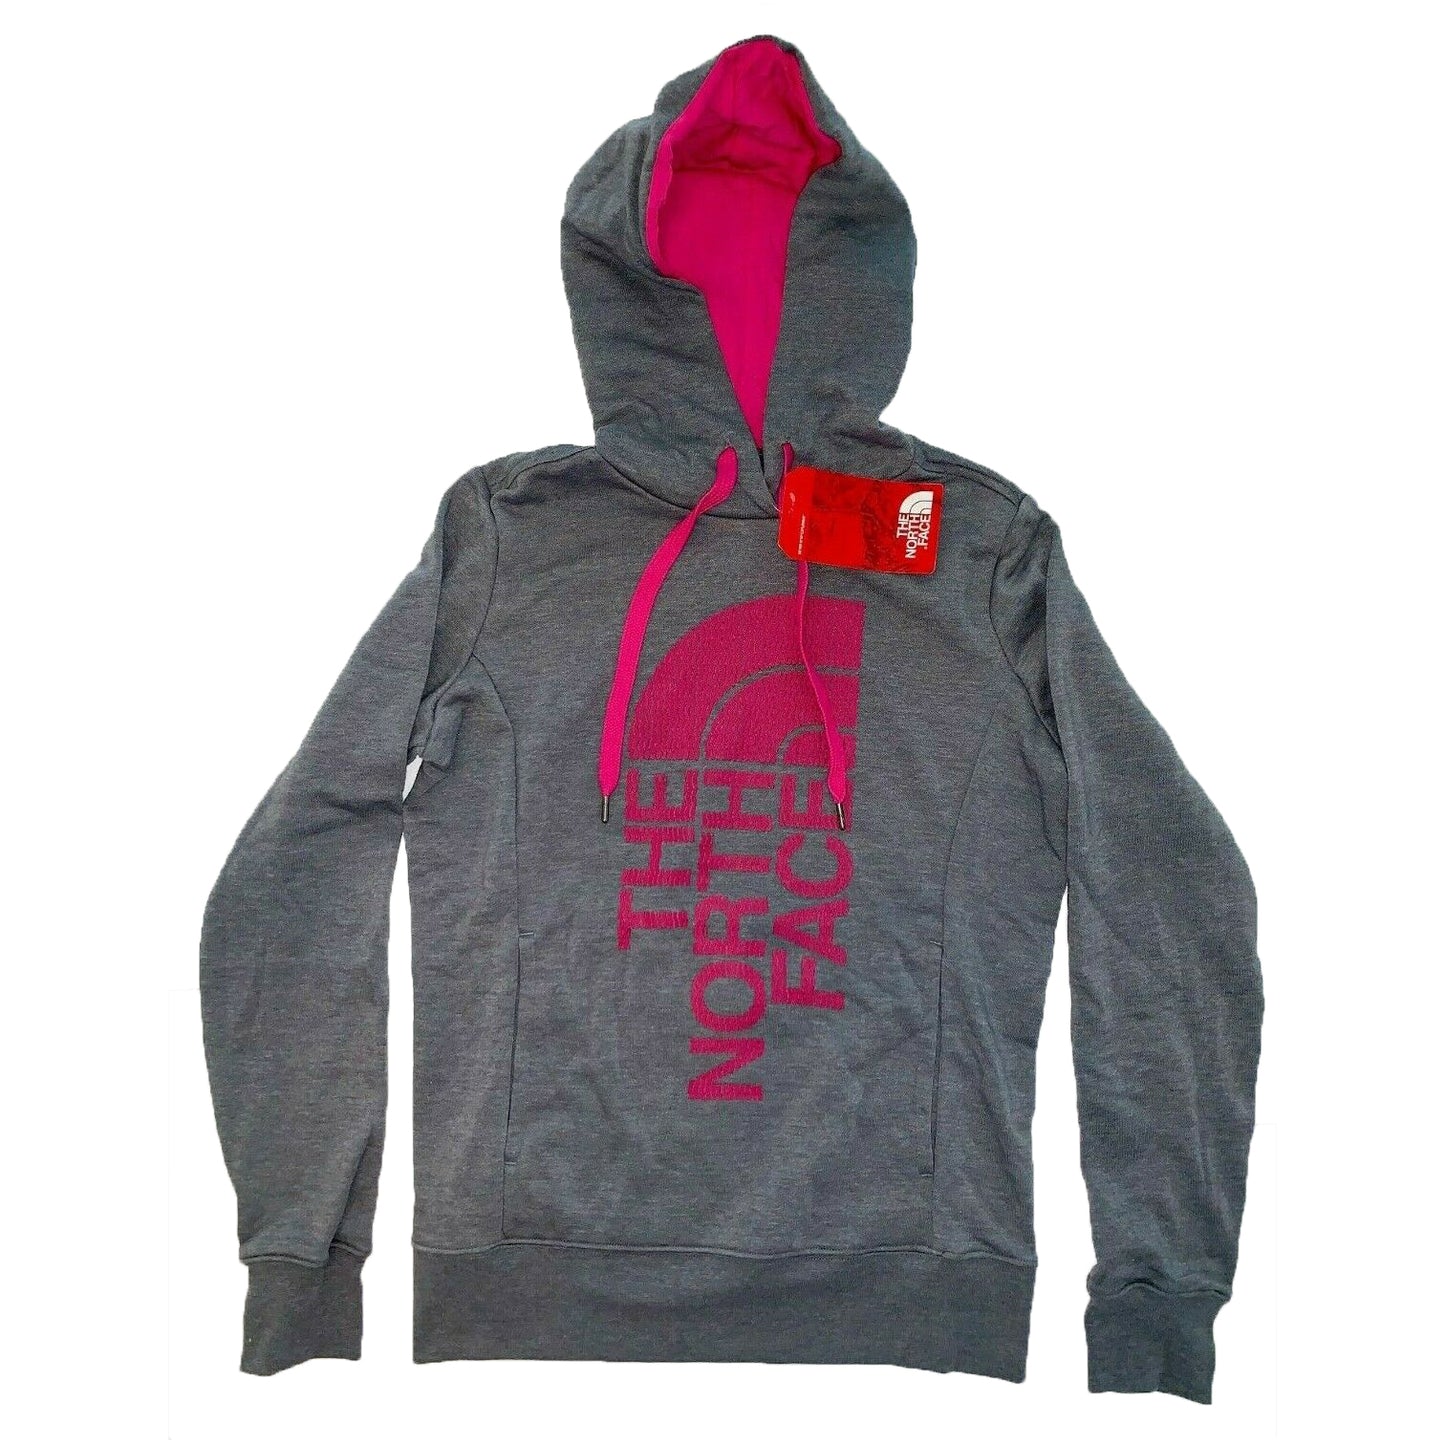 The North Face Women's Trivert Hoodie with Textured Print - Heather Grey/Pink